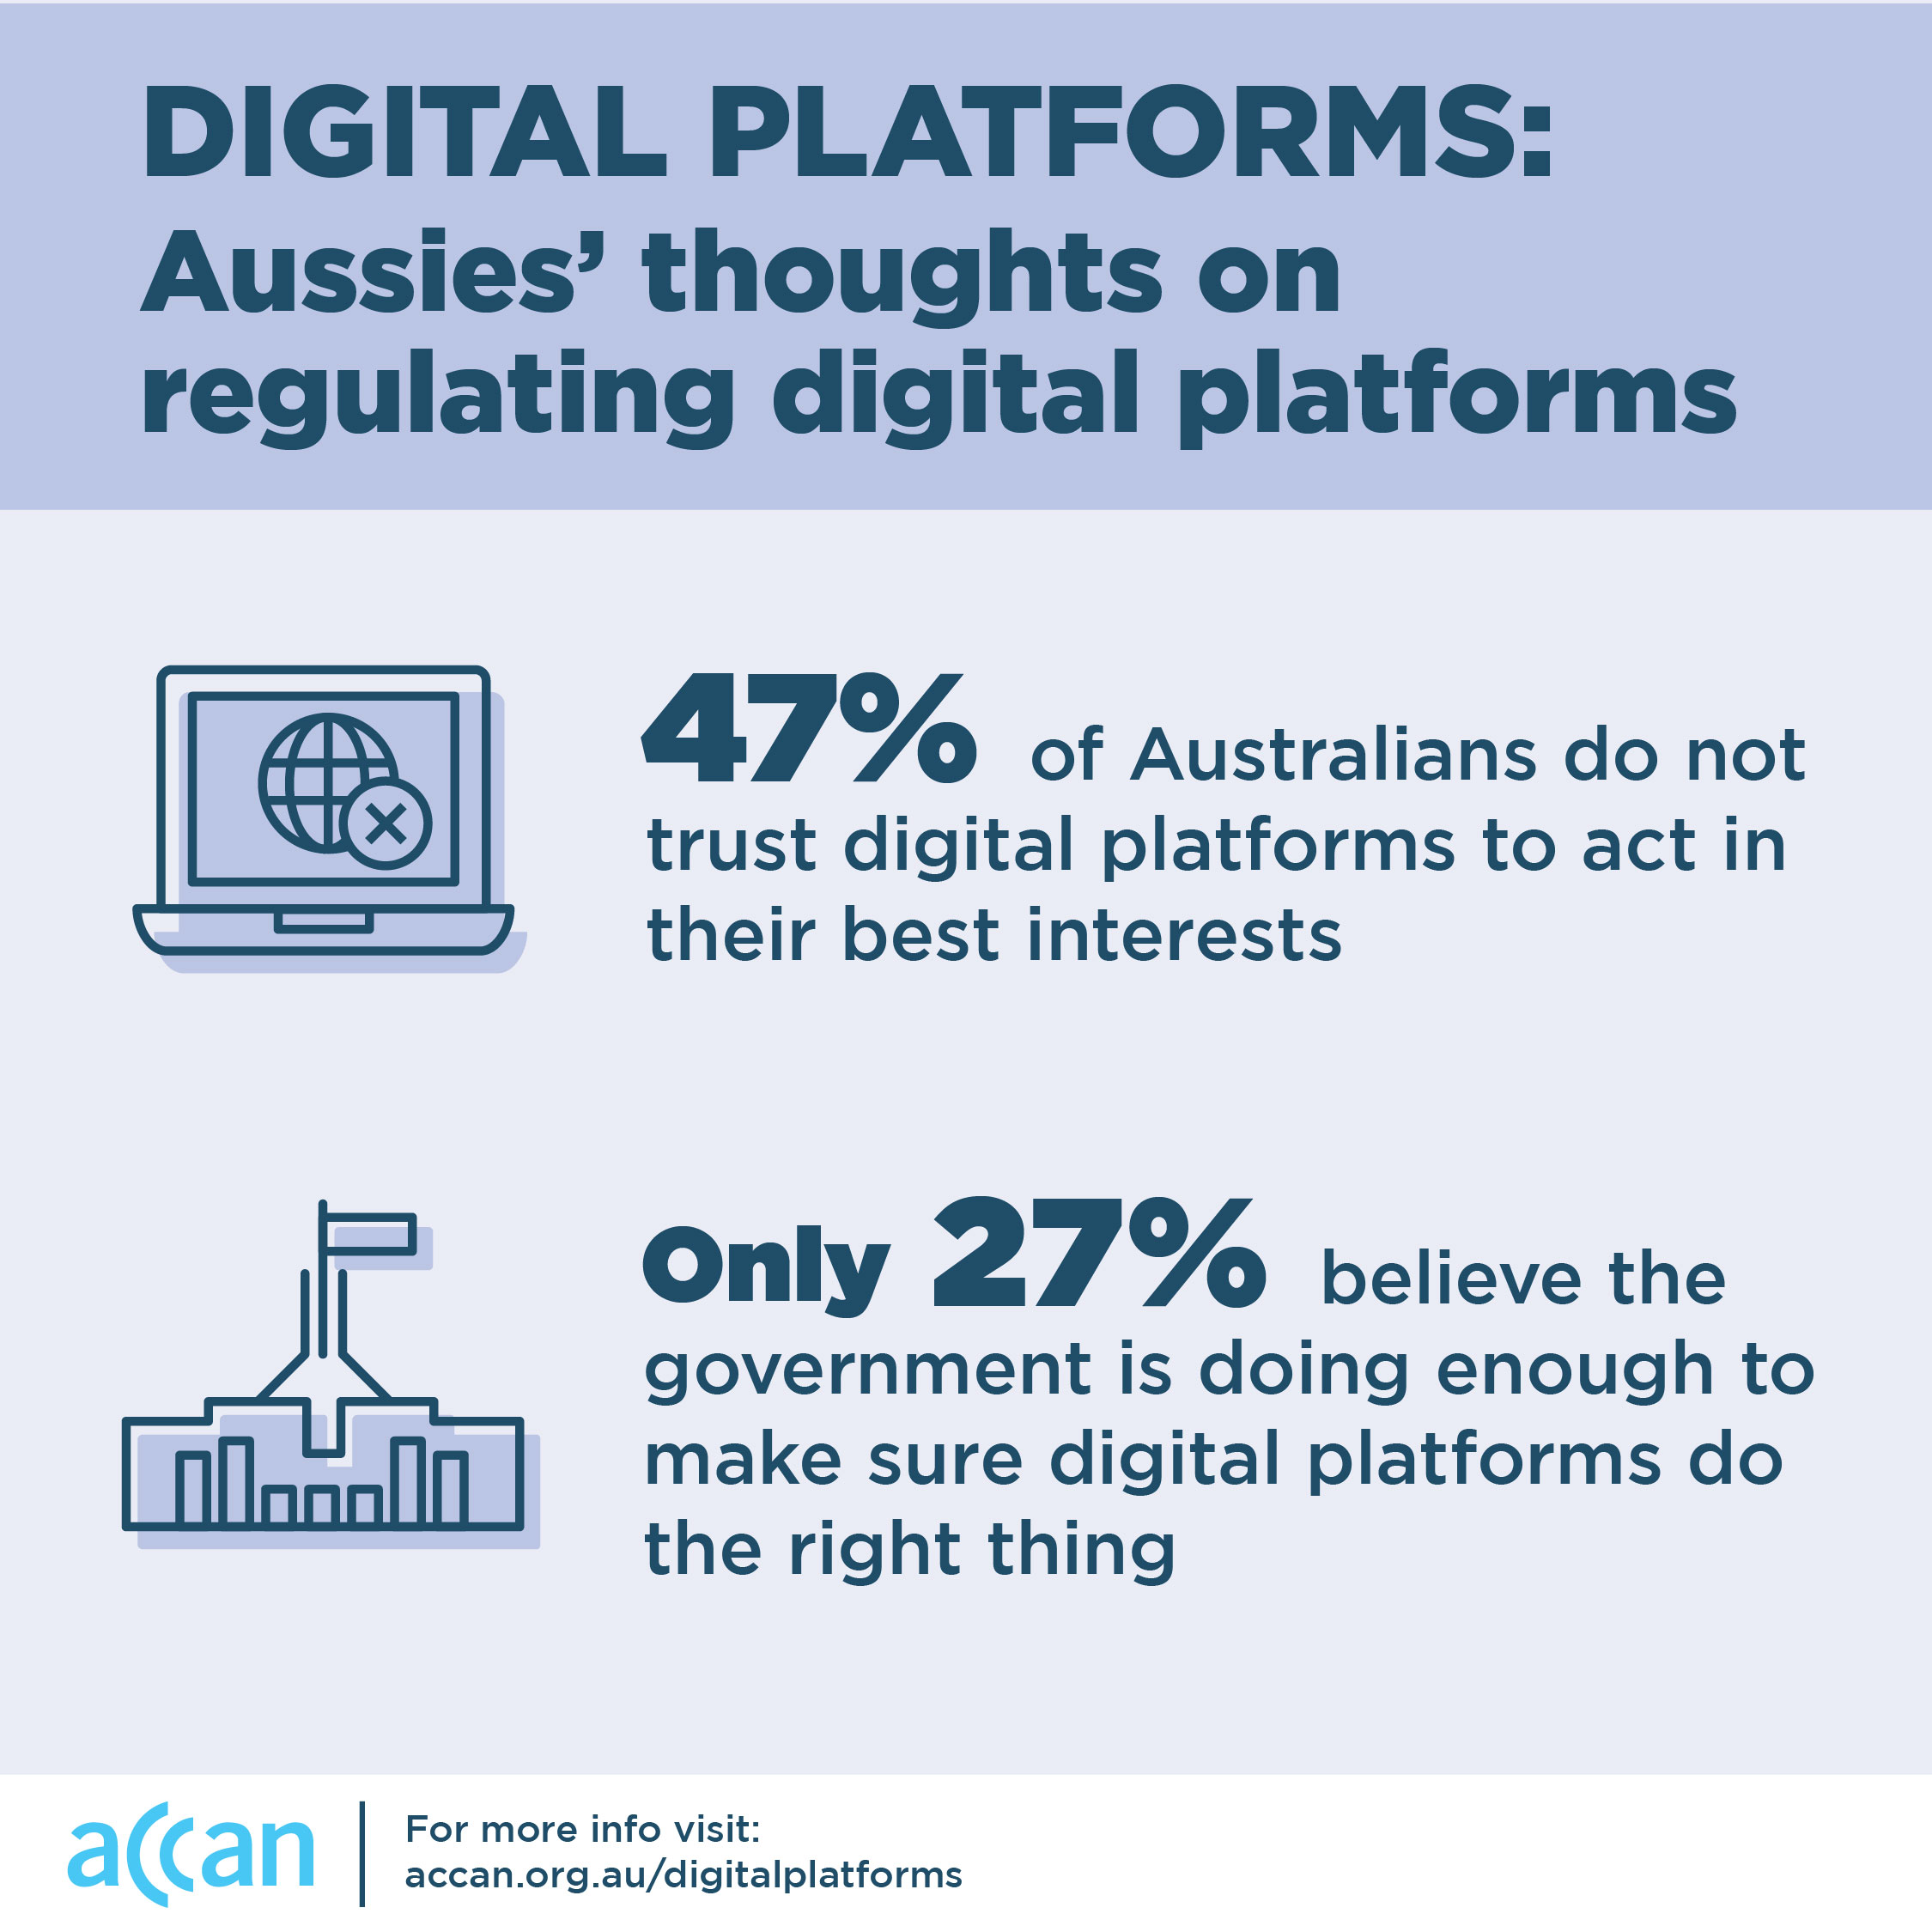 ACCAN Digital Platforms Research . Text reads: Digital platforms: Aussies' thoughts on regulating digital platforms. 47% of Australians do not trust digital platforms to act in their best interests. Only 27% believe the government is doing enough to make sure digital platforms  do the right thing.